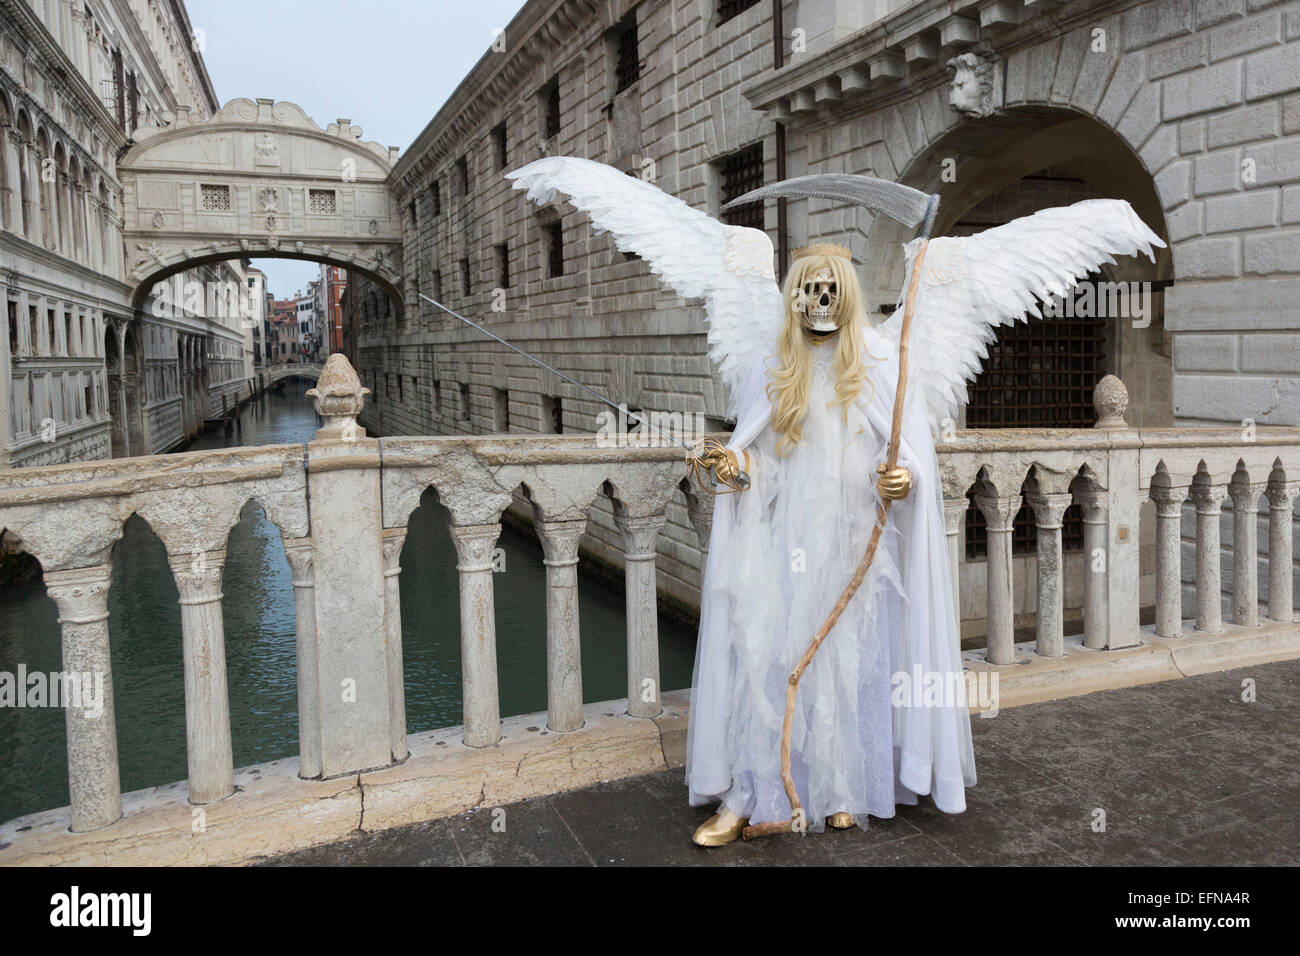 Venice, Italy, 8 February 2015. A person wears an 'Angel of Death' costume. People wear traditional masks and costumes to celebrate the 2015 Carnival in Venice. carnivalpix/Alamy Live News Stock Photo